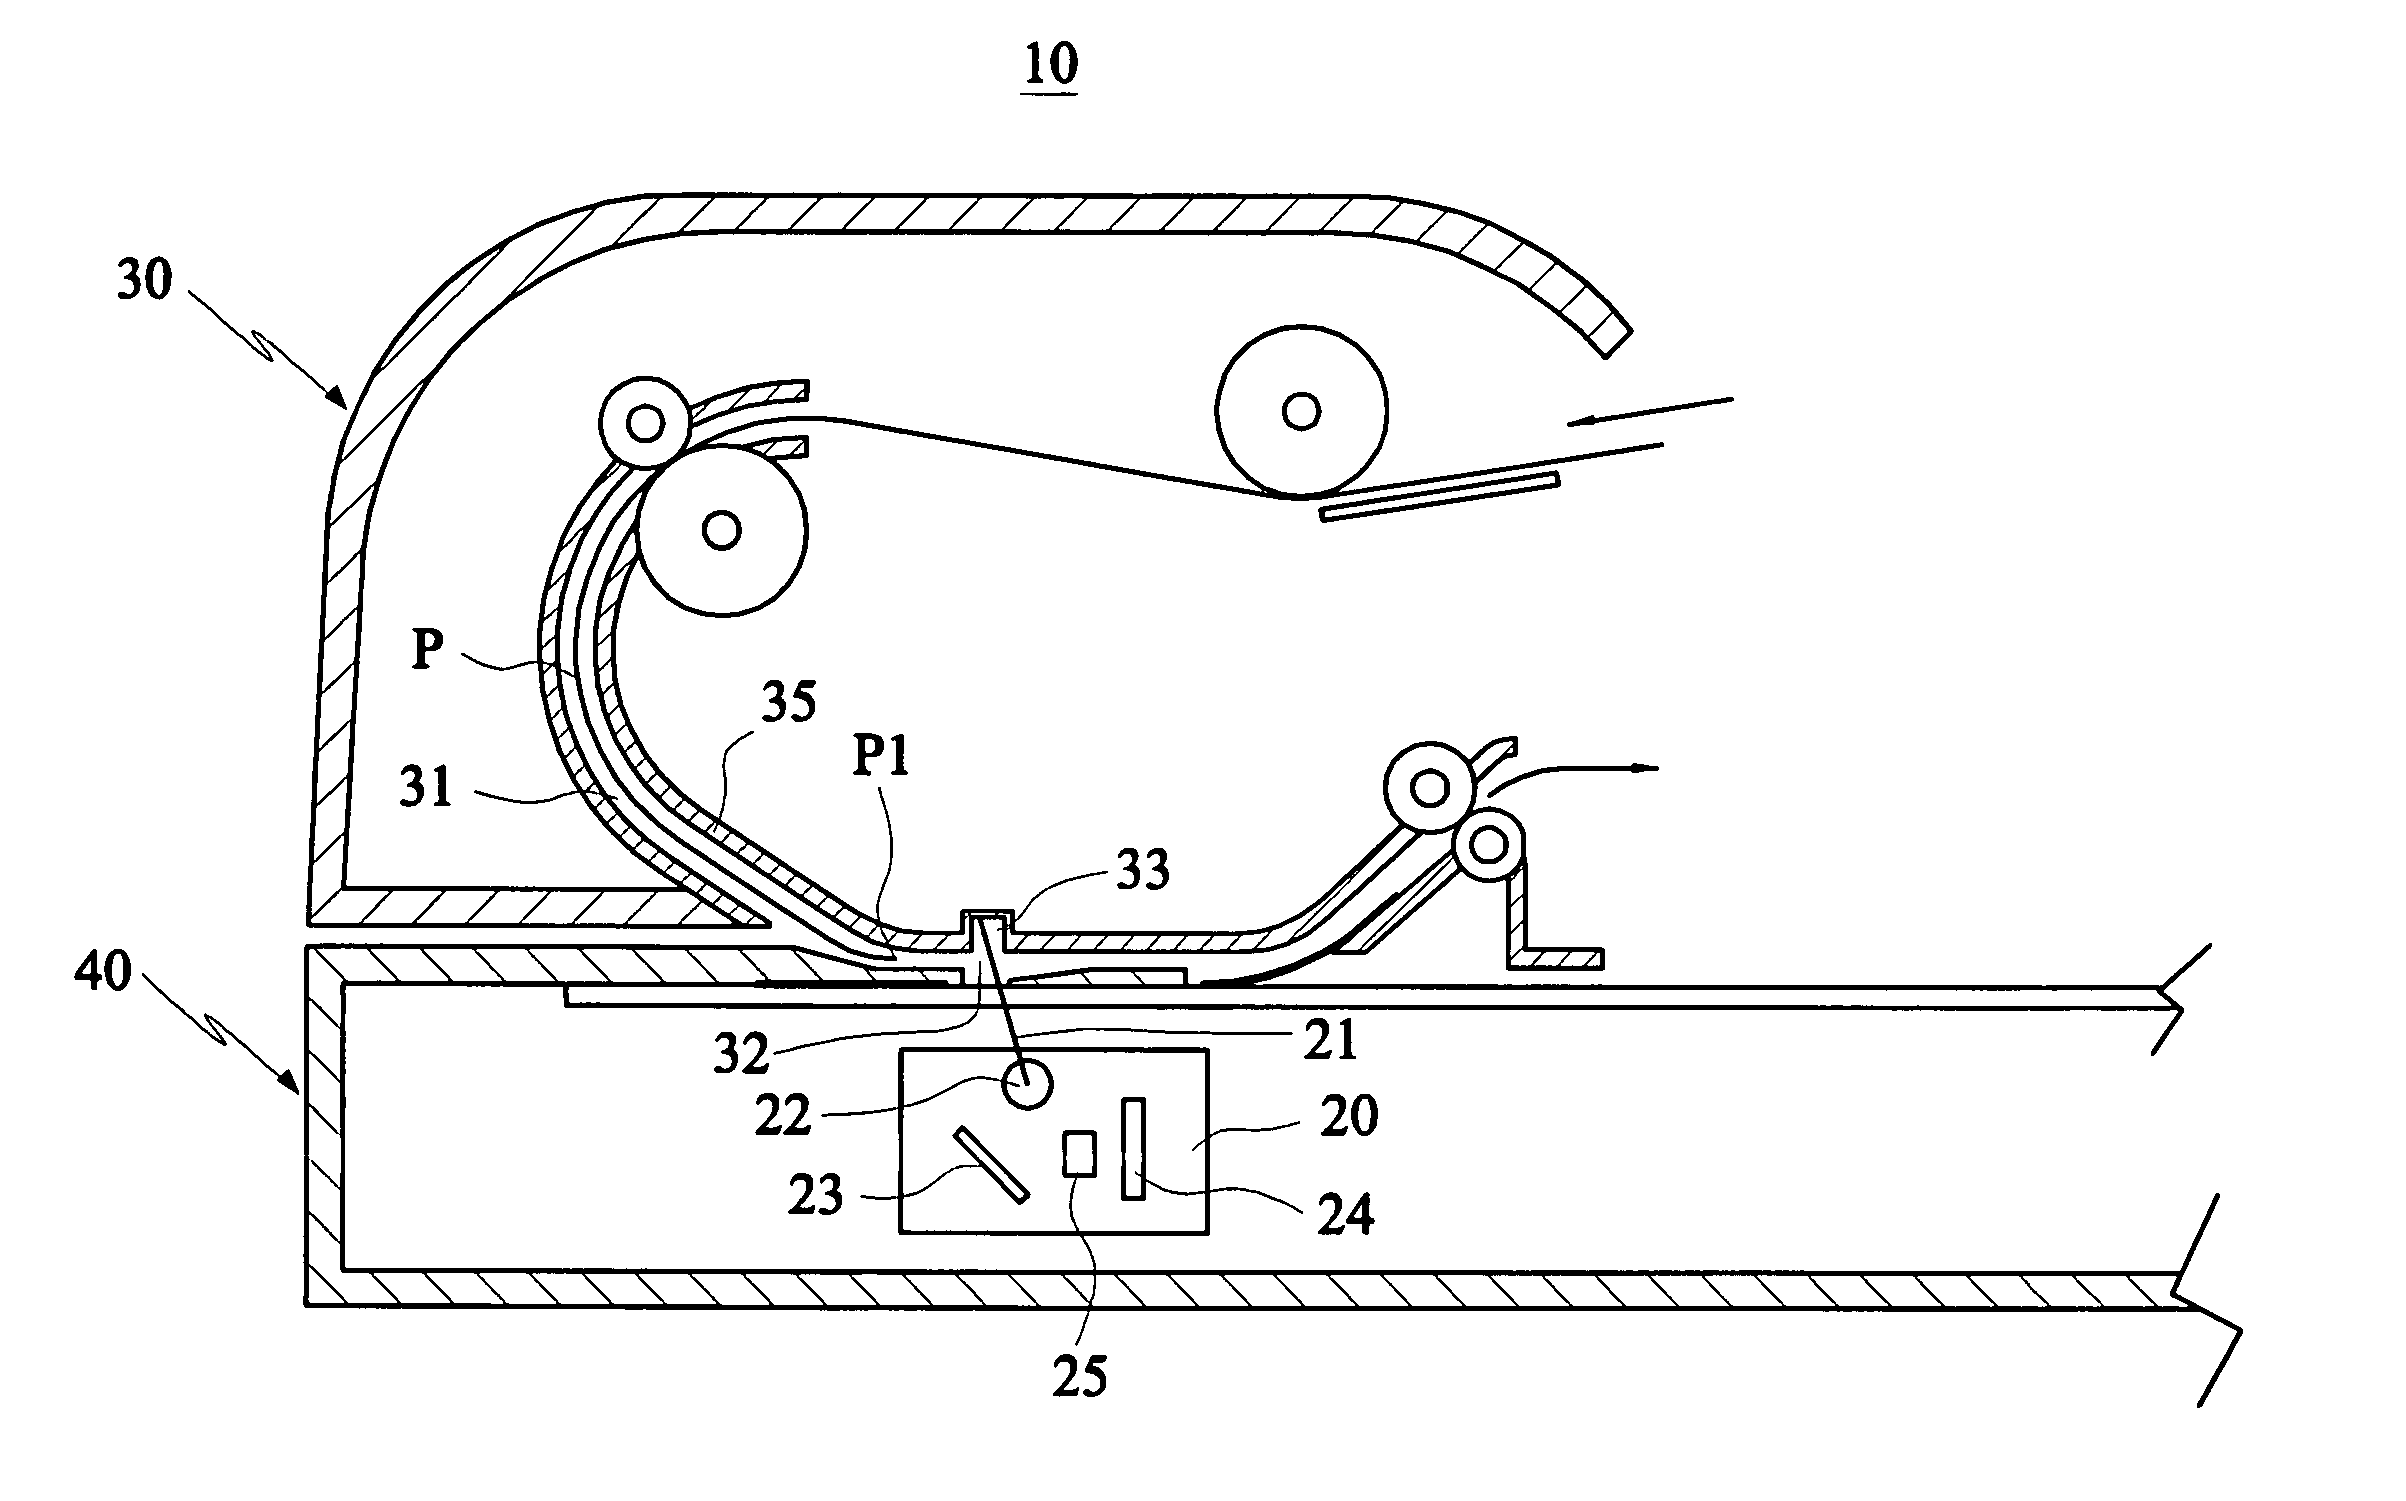 Sheet-fed scanning device capable of detecting a document edge